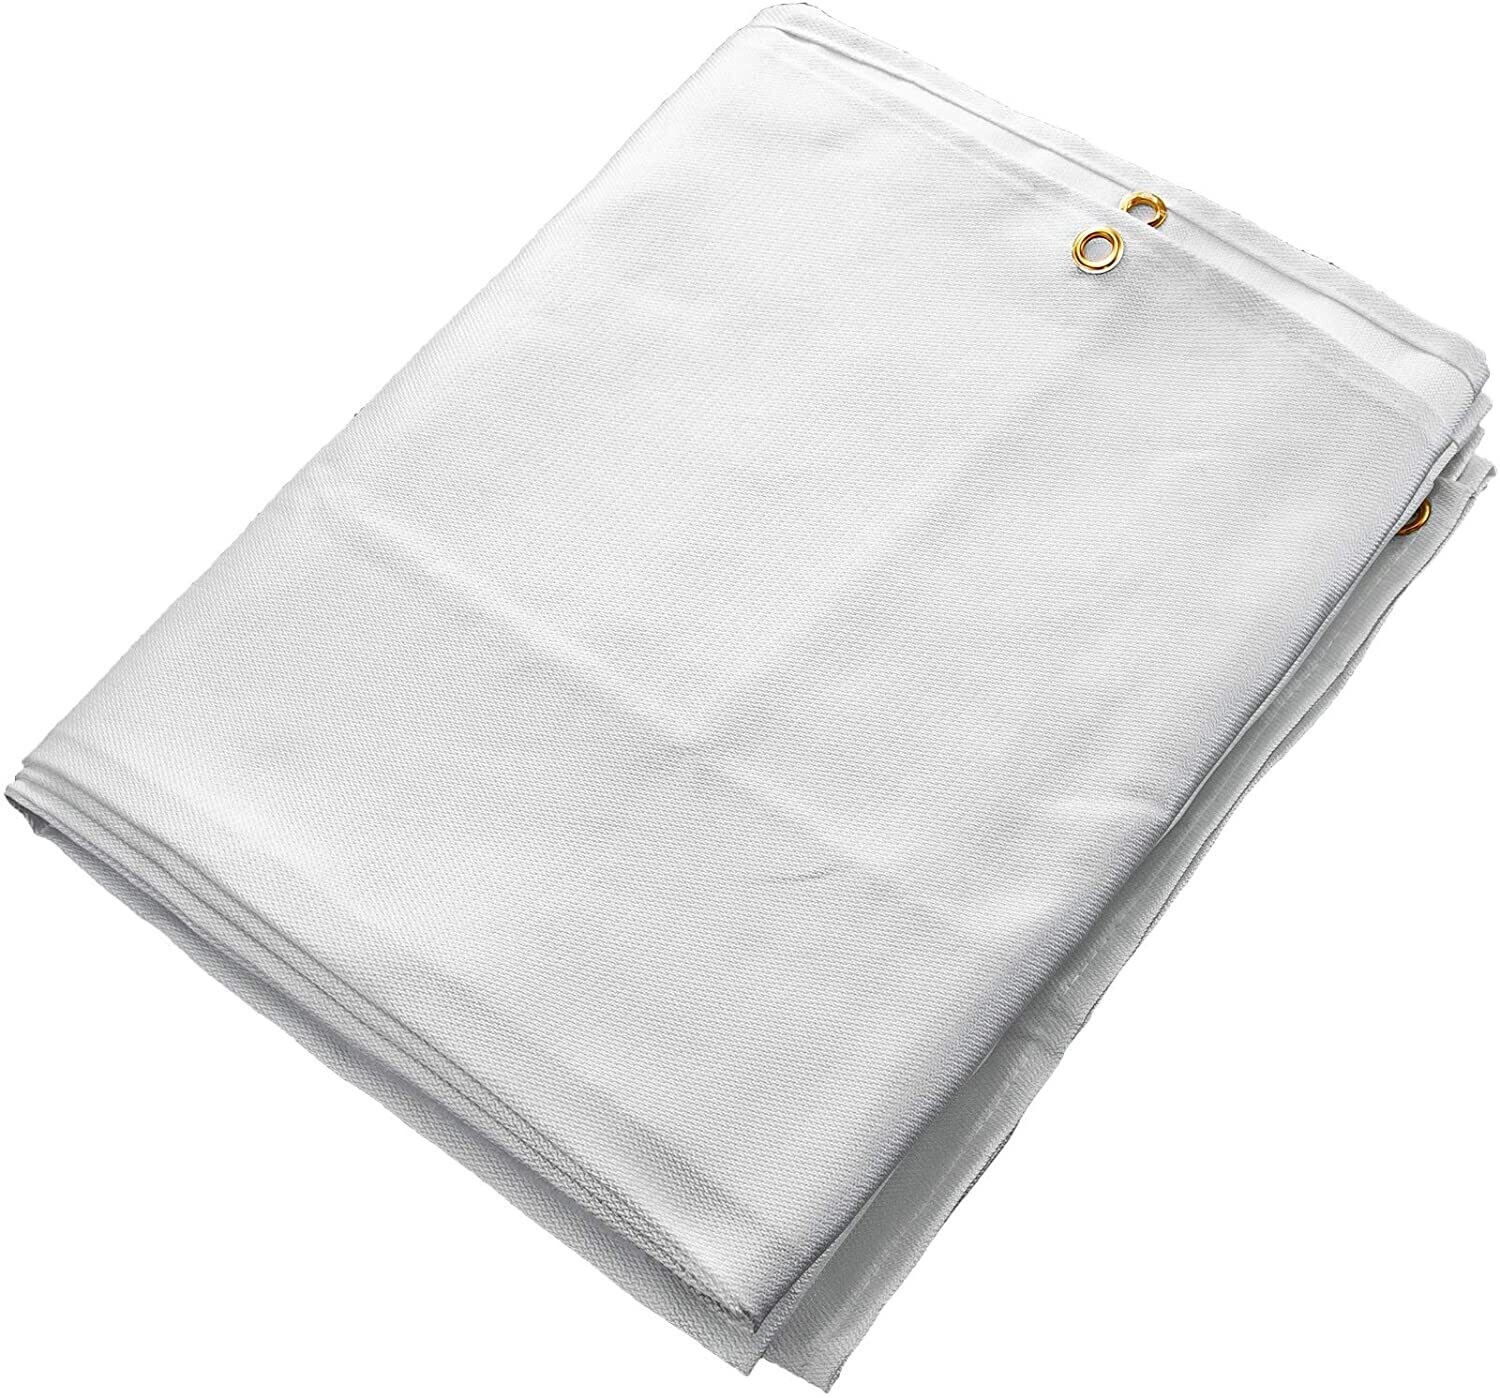 Welding Blanket 8 x 10 Heat Protection Fabric White